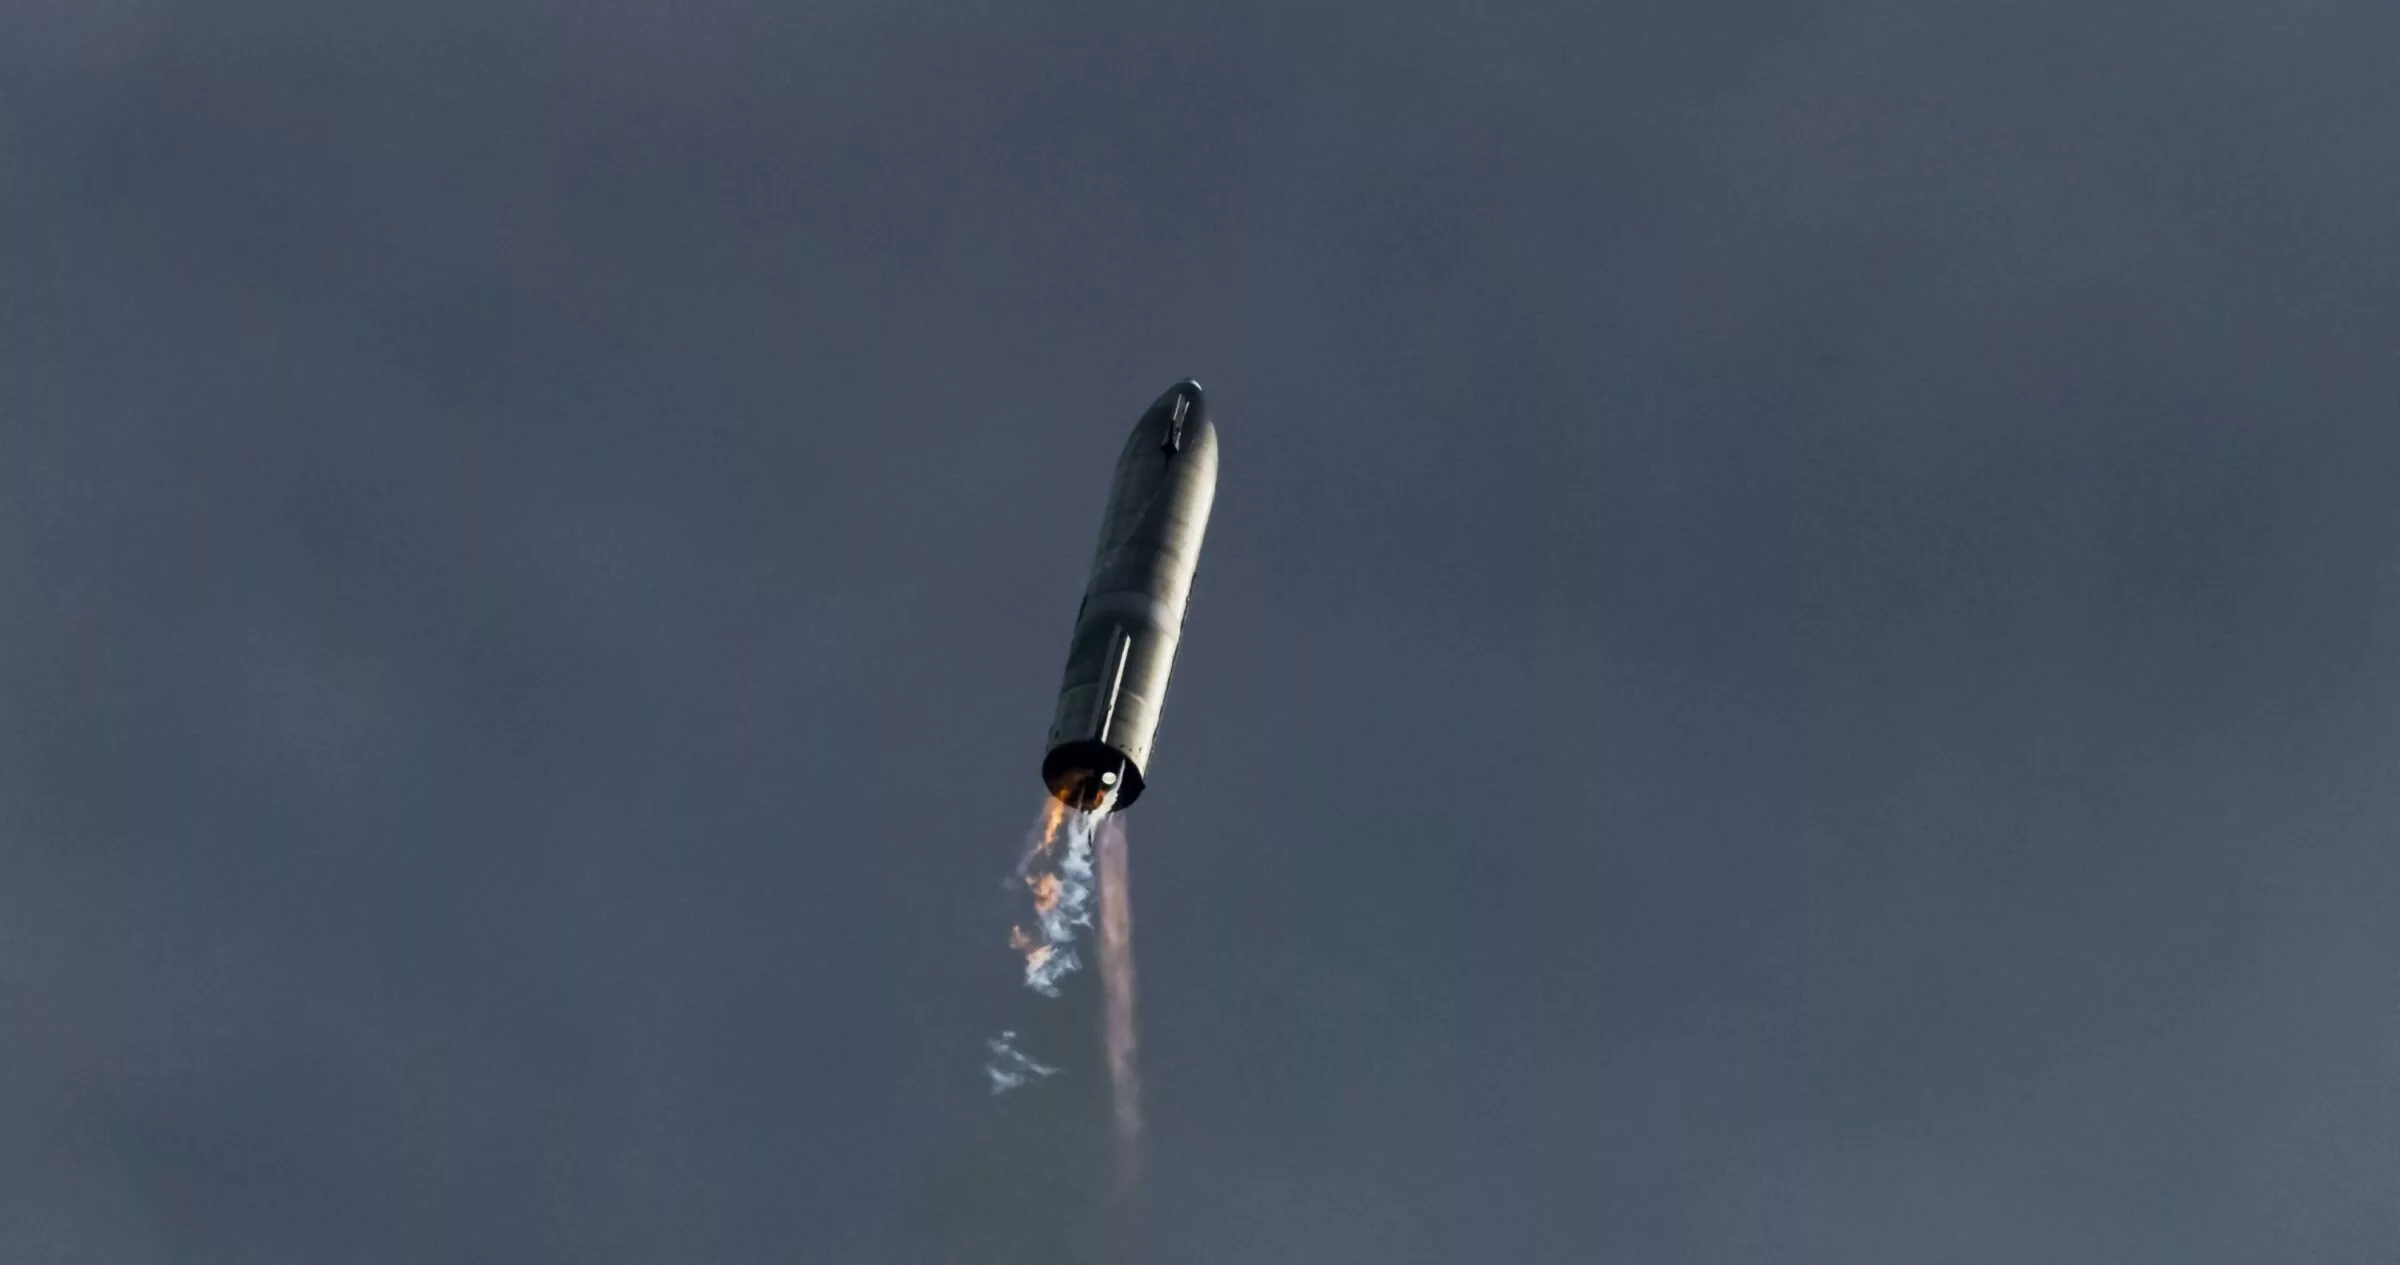 Starship test flight 3. SPACEX Starship Test Flight. Sn10 SPACEX landing photo album. Rapid unscheduled Disassembly Space x.